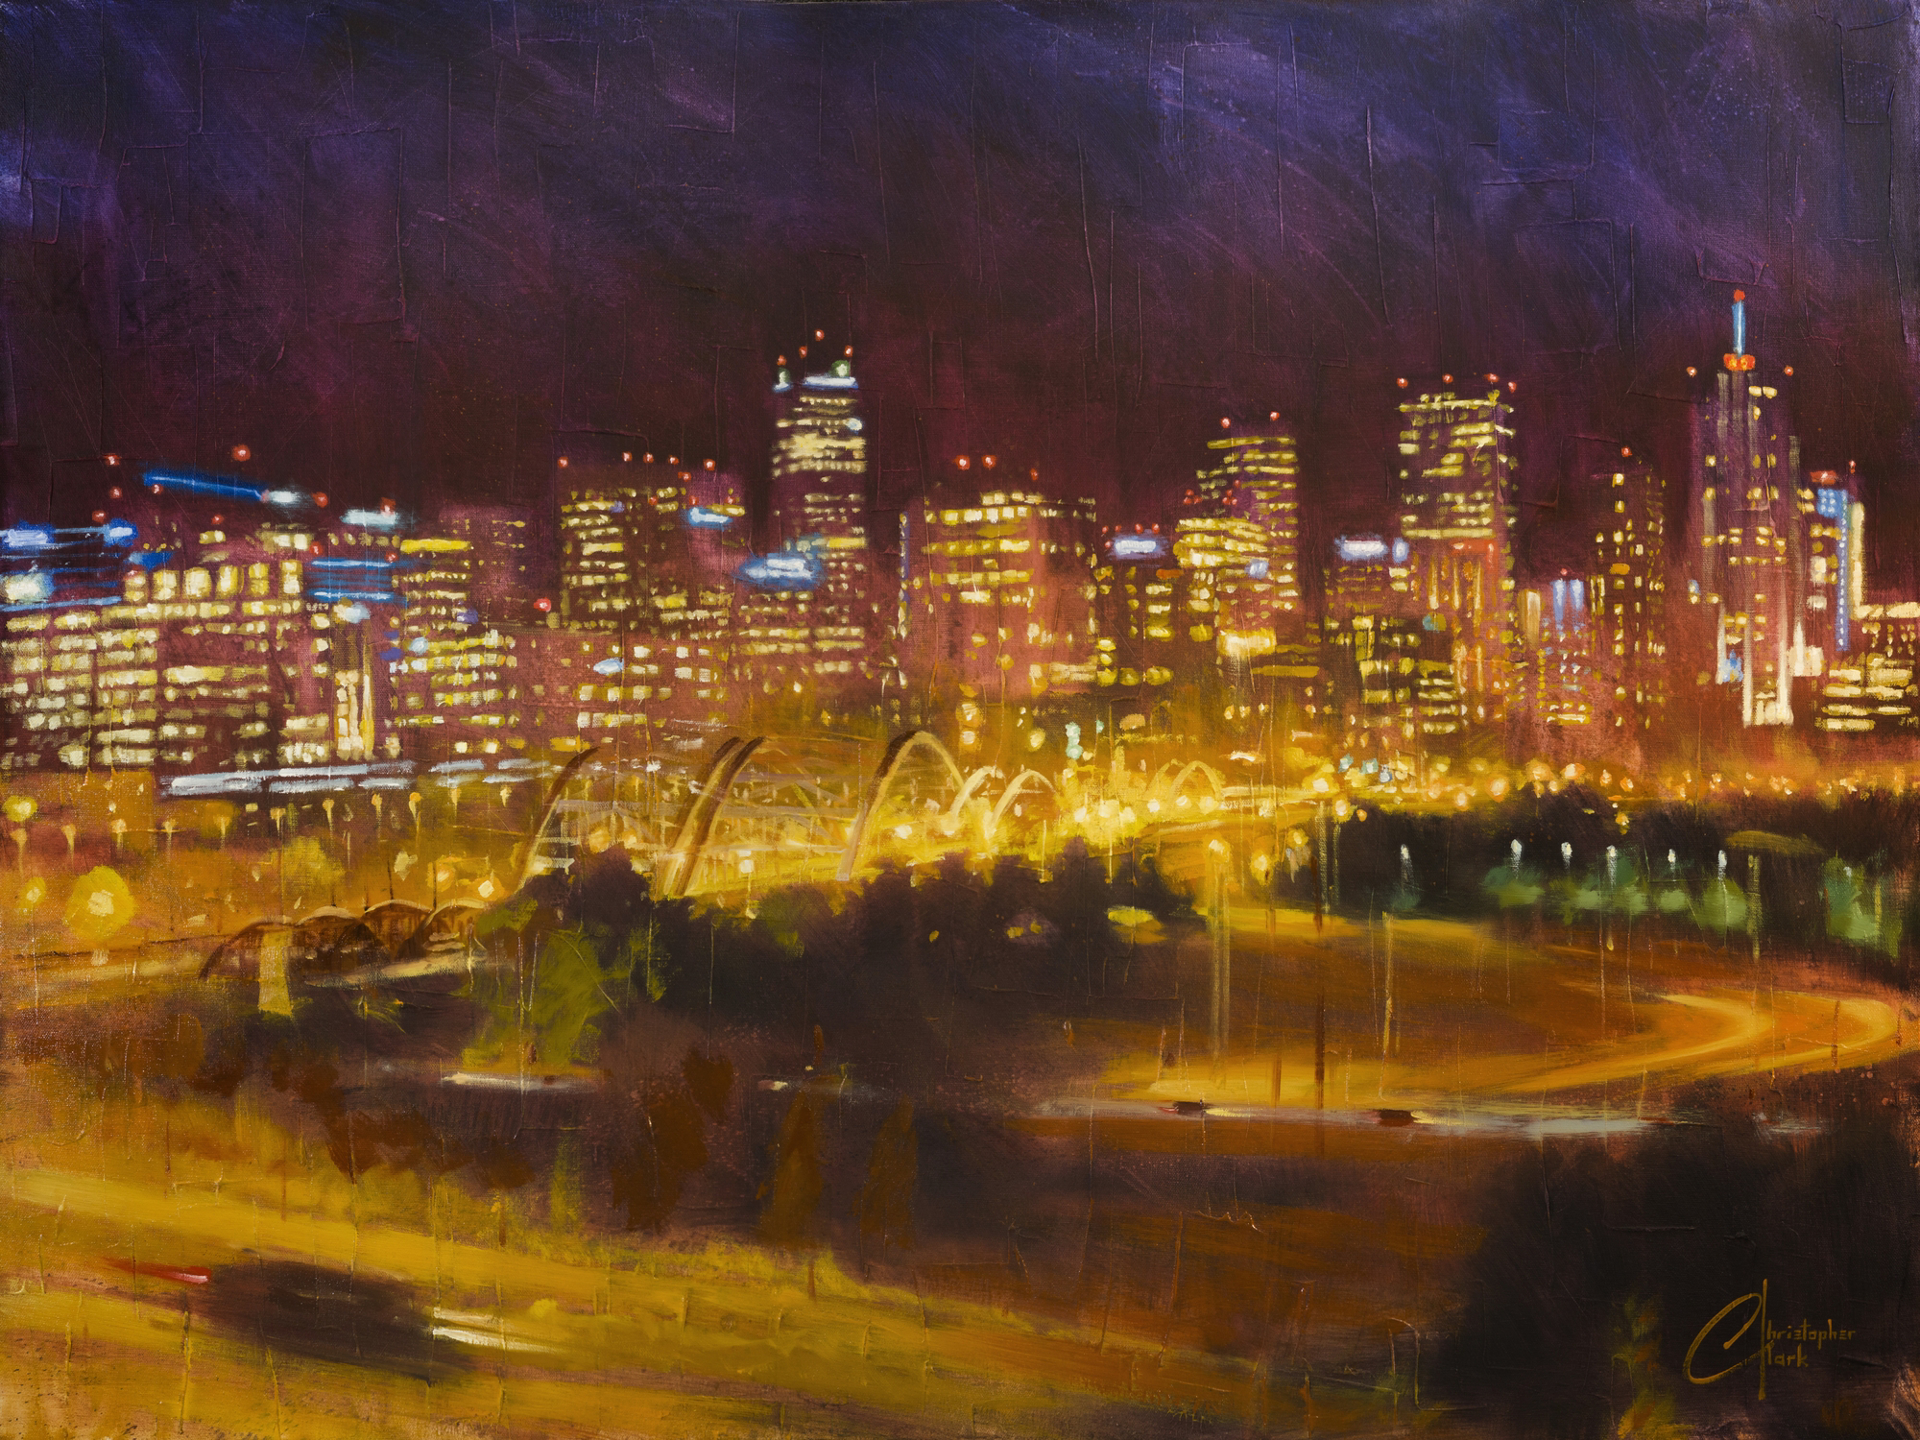 Denver Skyline from Speer and 23rd Ave at Night by Christopher Clark